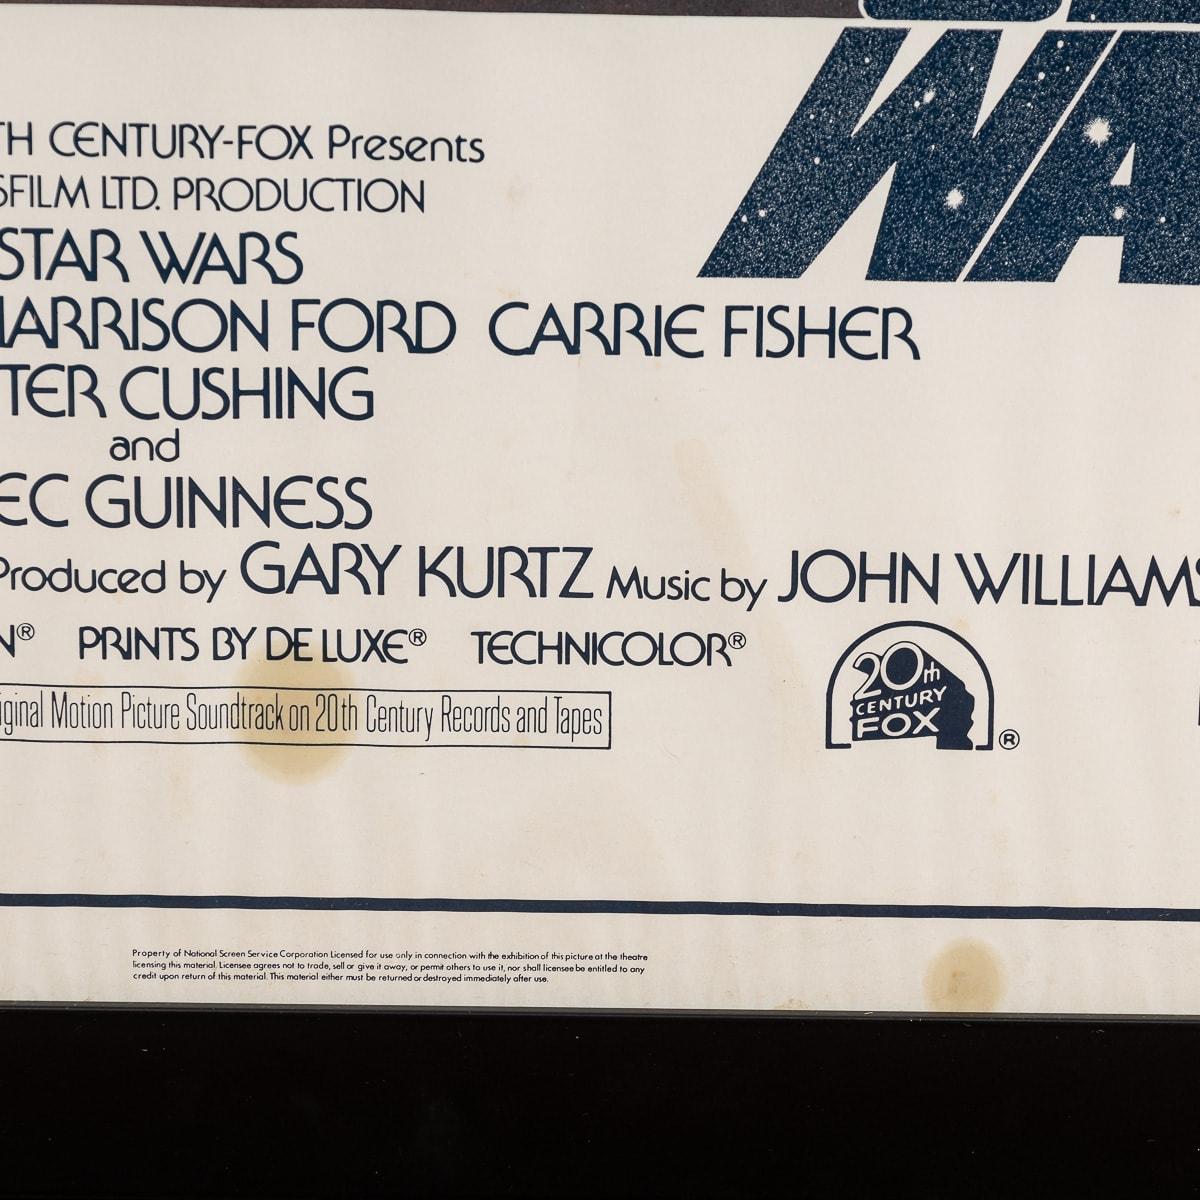 Original U.S. Release Star Wars 'A New Hope' Style A Poster 77/21 c.1977 For Sale 8